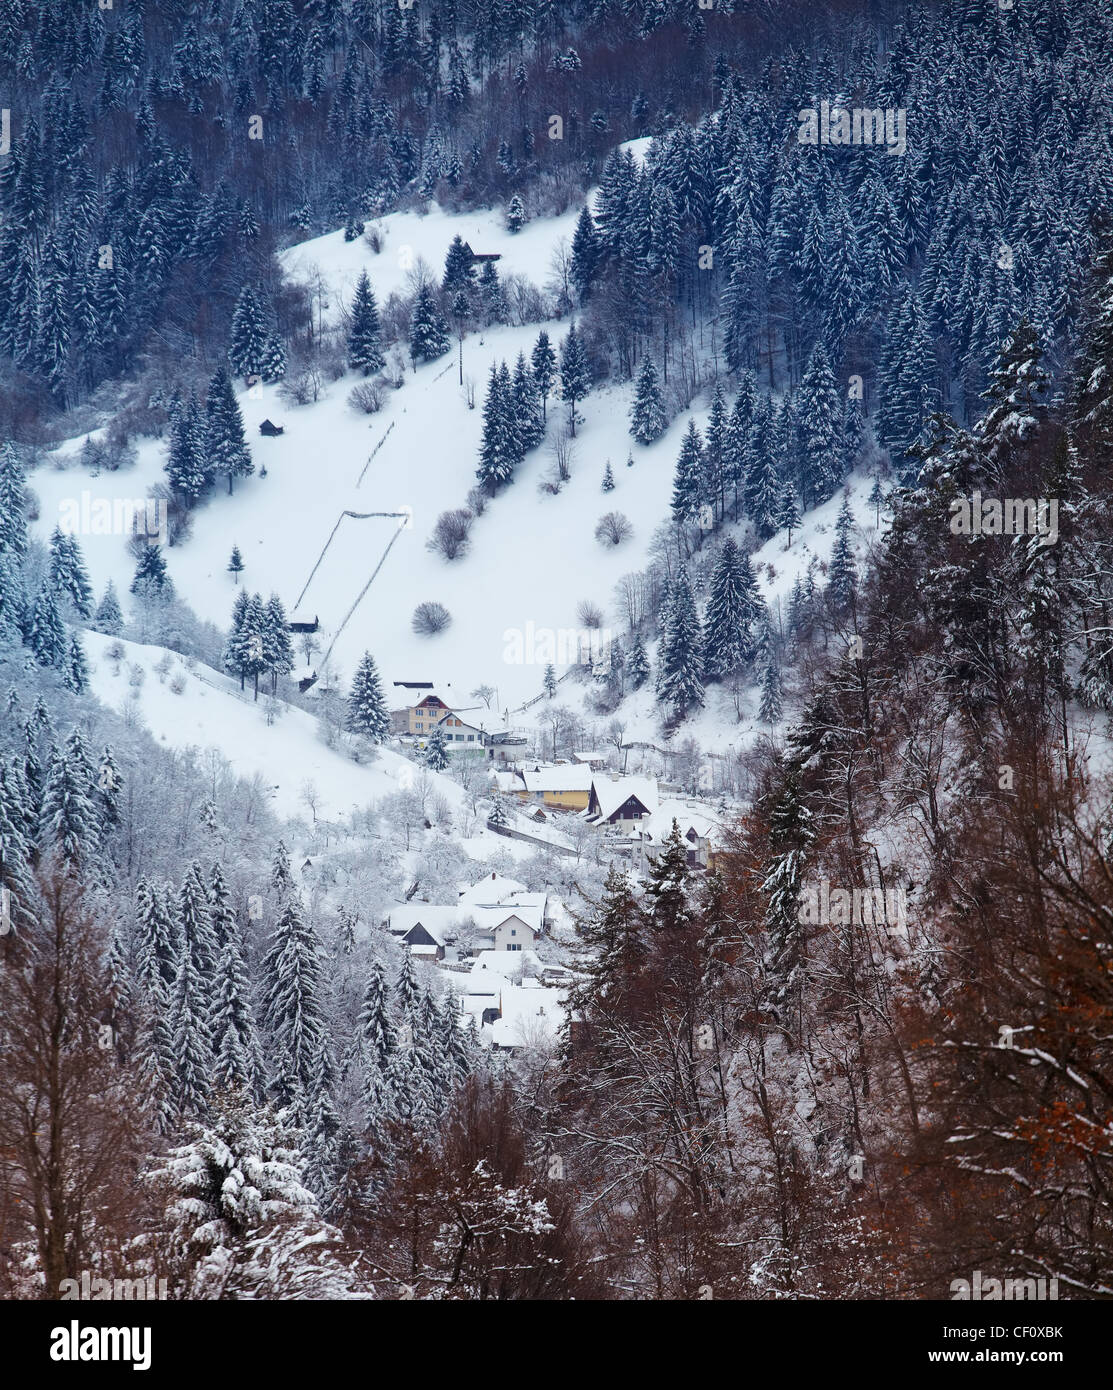 Village of Moeciu in Brasov county, Romania, during wintertime, seen from high altitude. Stock Photo